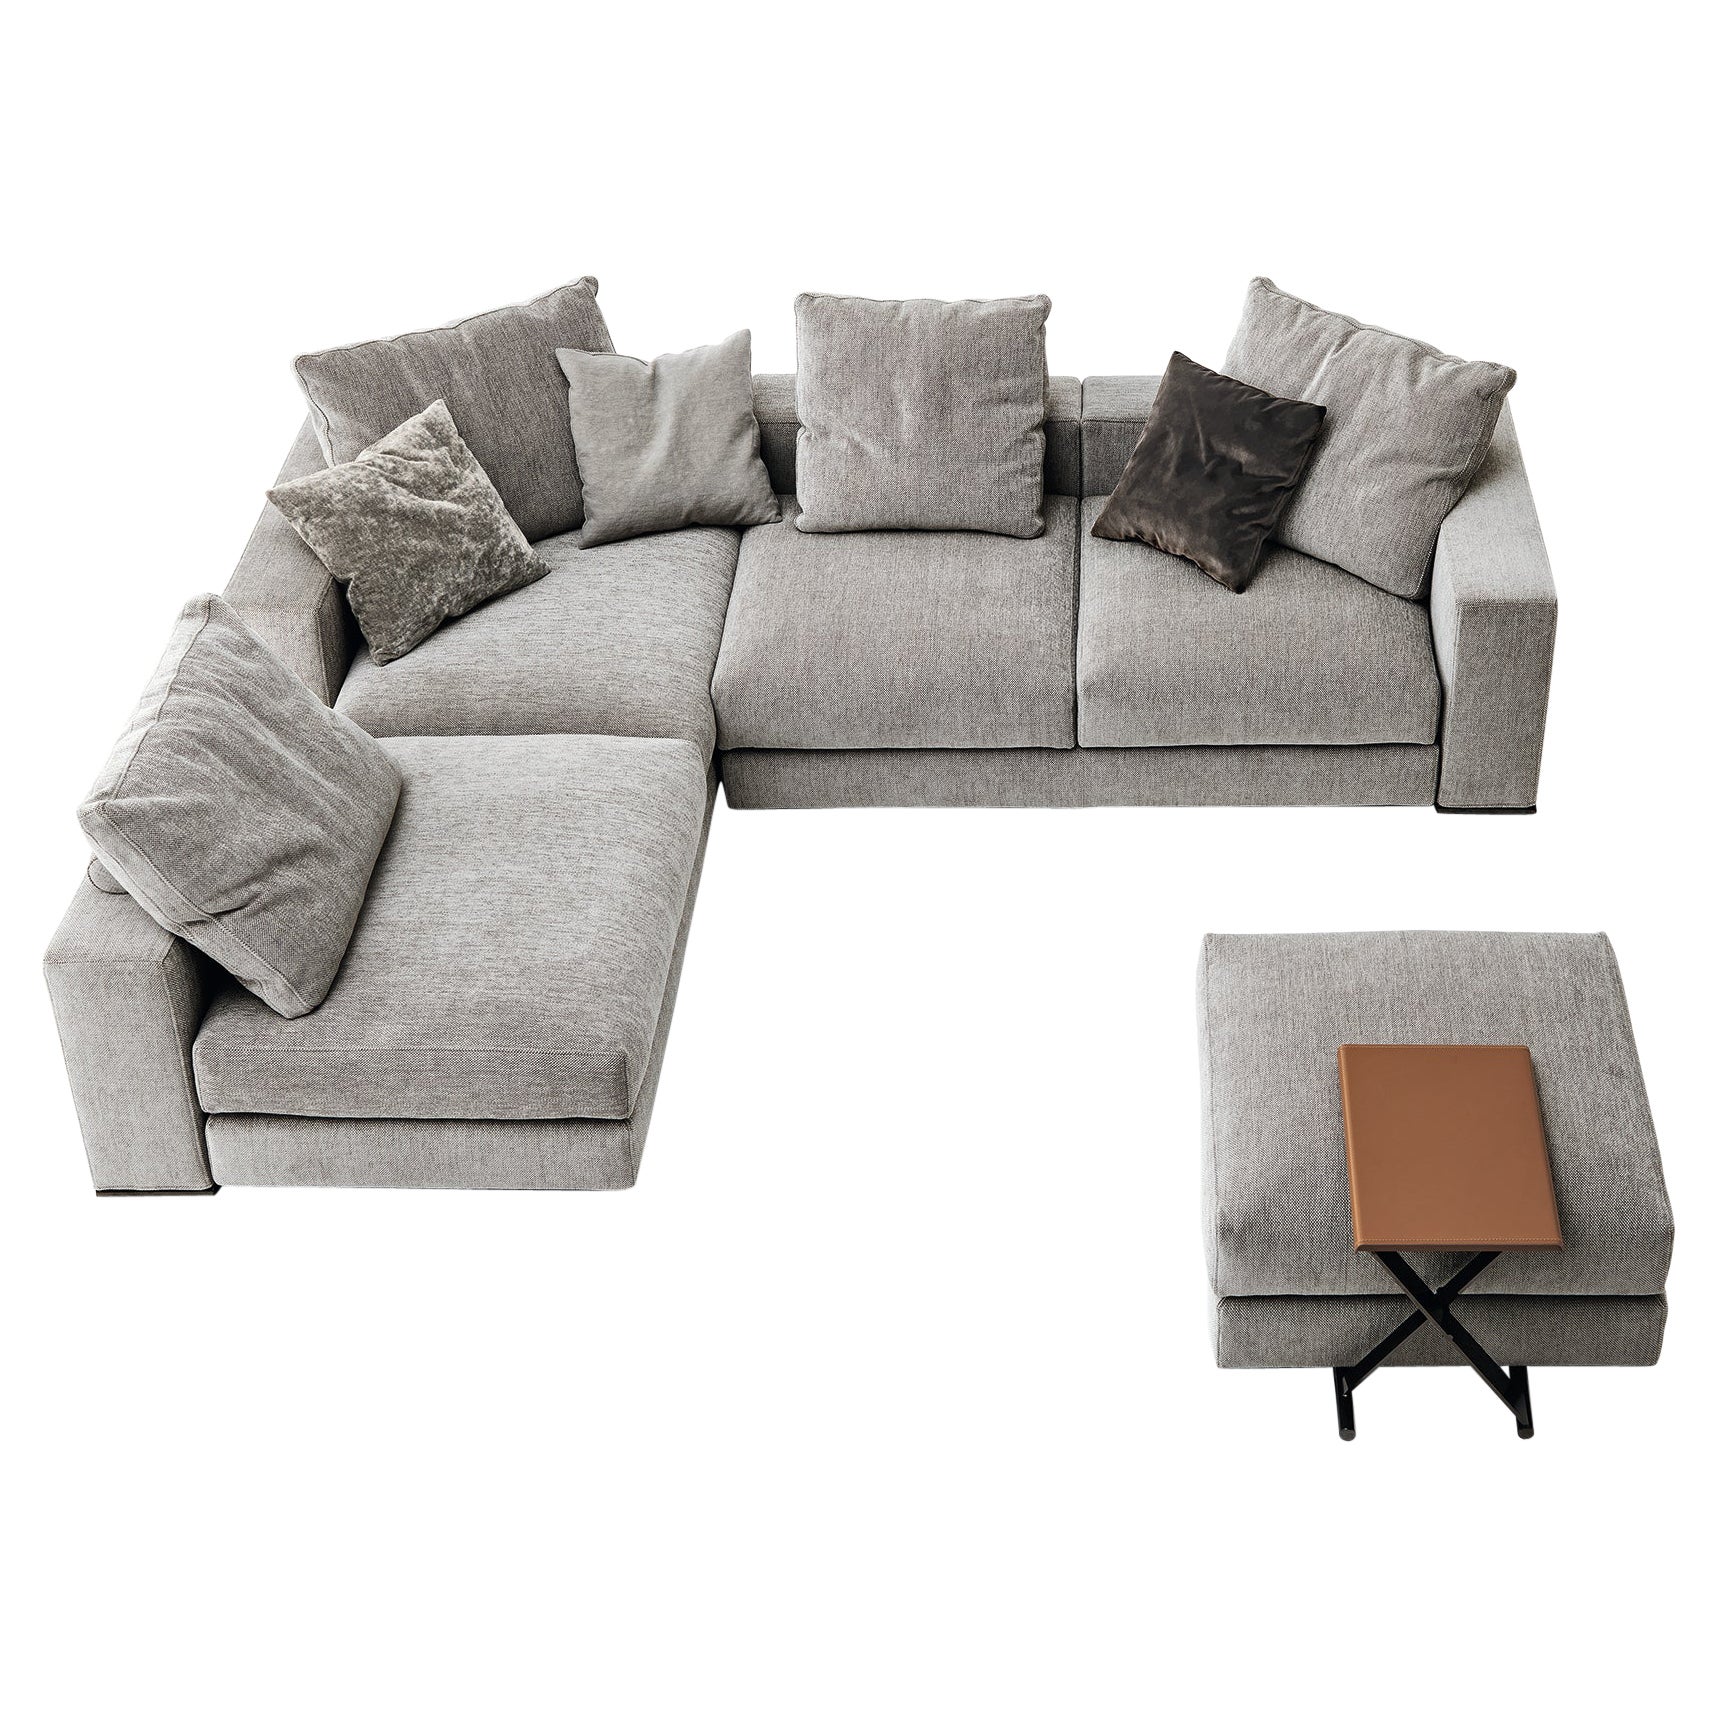 Ananta Class 23 Large Sectional Sofa in Lusso Upholstery by Sergio Bicego